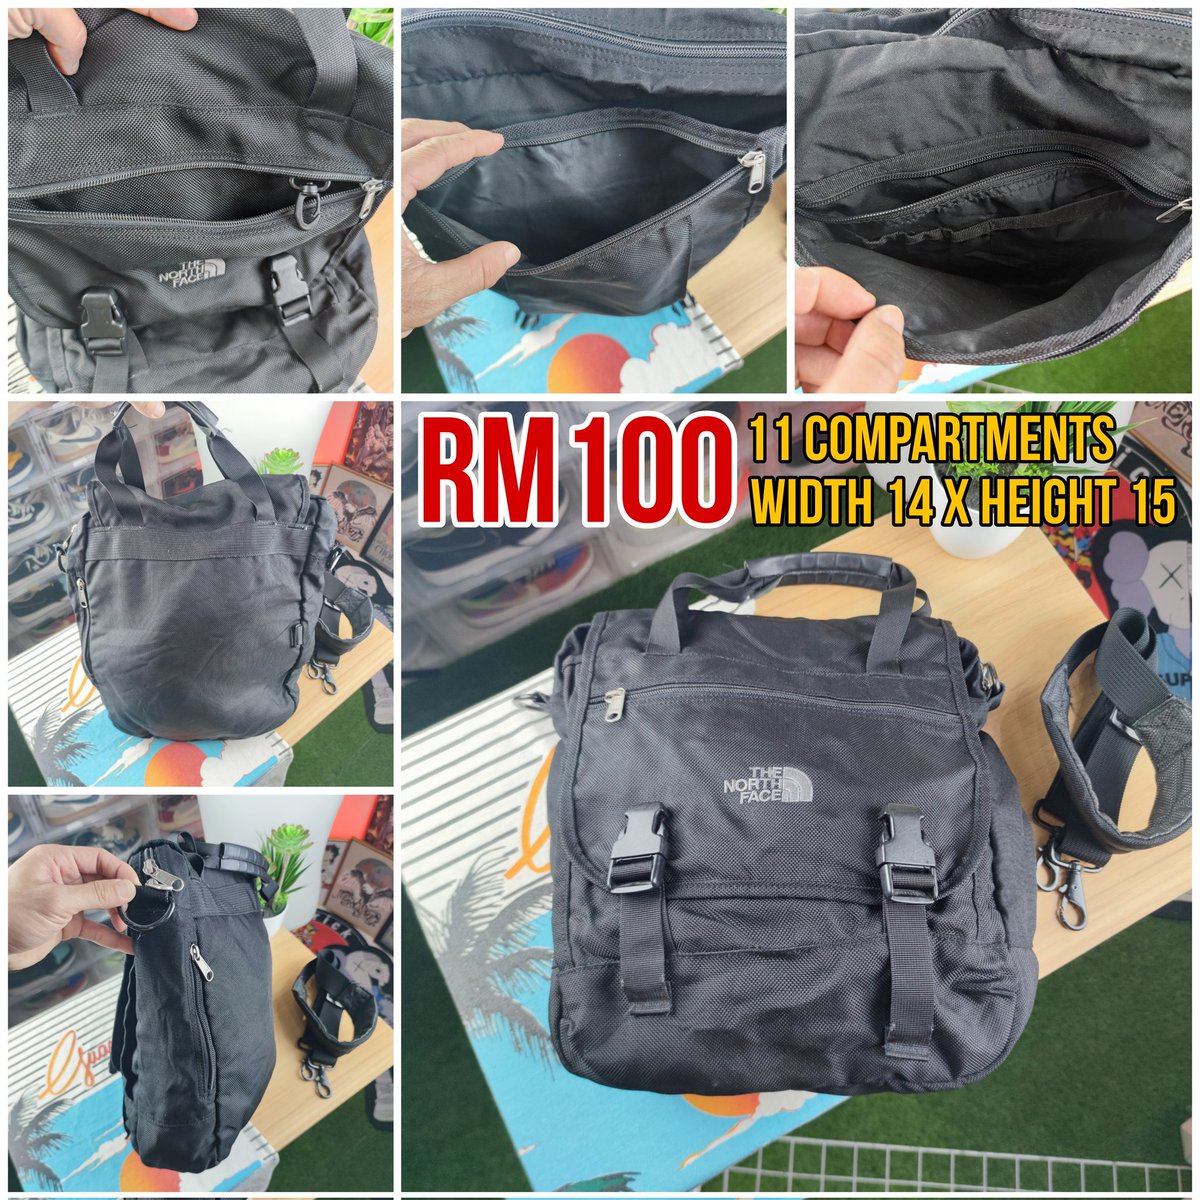 ‼️FOR SALE‼️

👜 THE NORTH FACE SLING BAG LARGE

💵 RM100 only! 

Size : Width 14' x Height 15'
Details : 11 compartments. Condition 9/10 ✨

#thenorthface #thenorthfaceslingbag #thenorthfacebag #thenorthfacebundle #thenorthfacemalaysia #thenorthfaceoriginal #slingbag #hikingbag